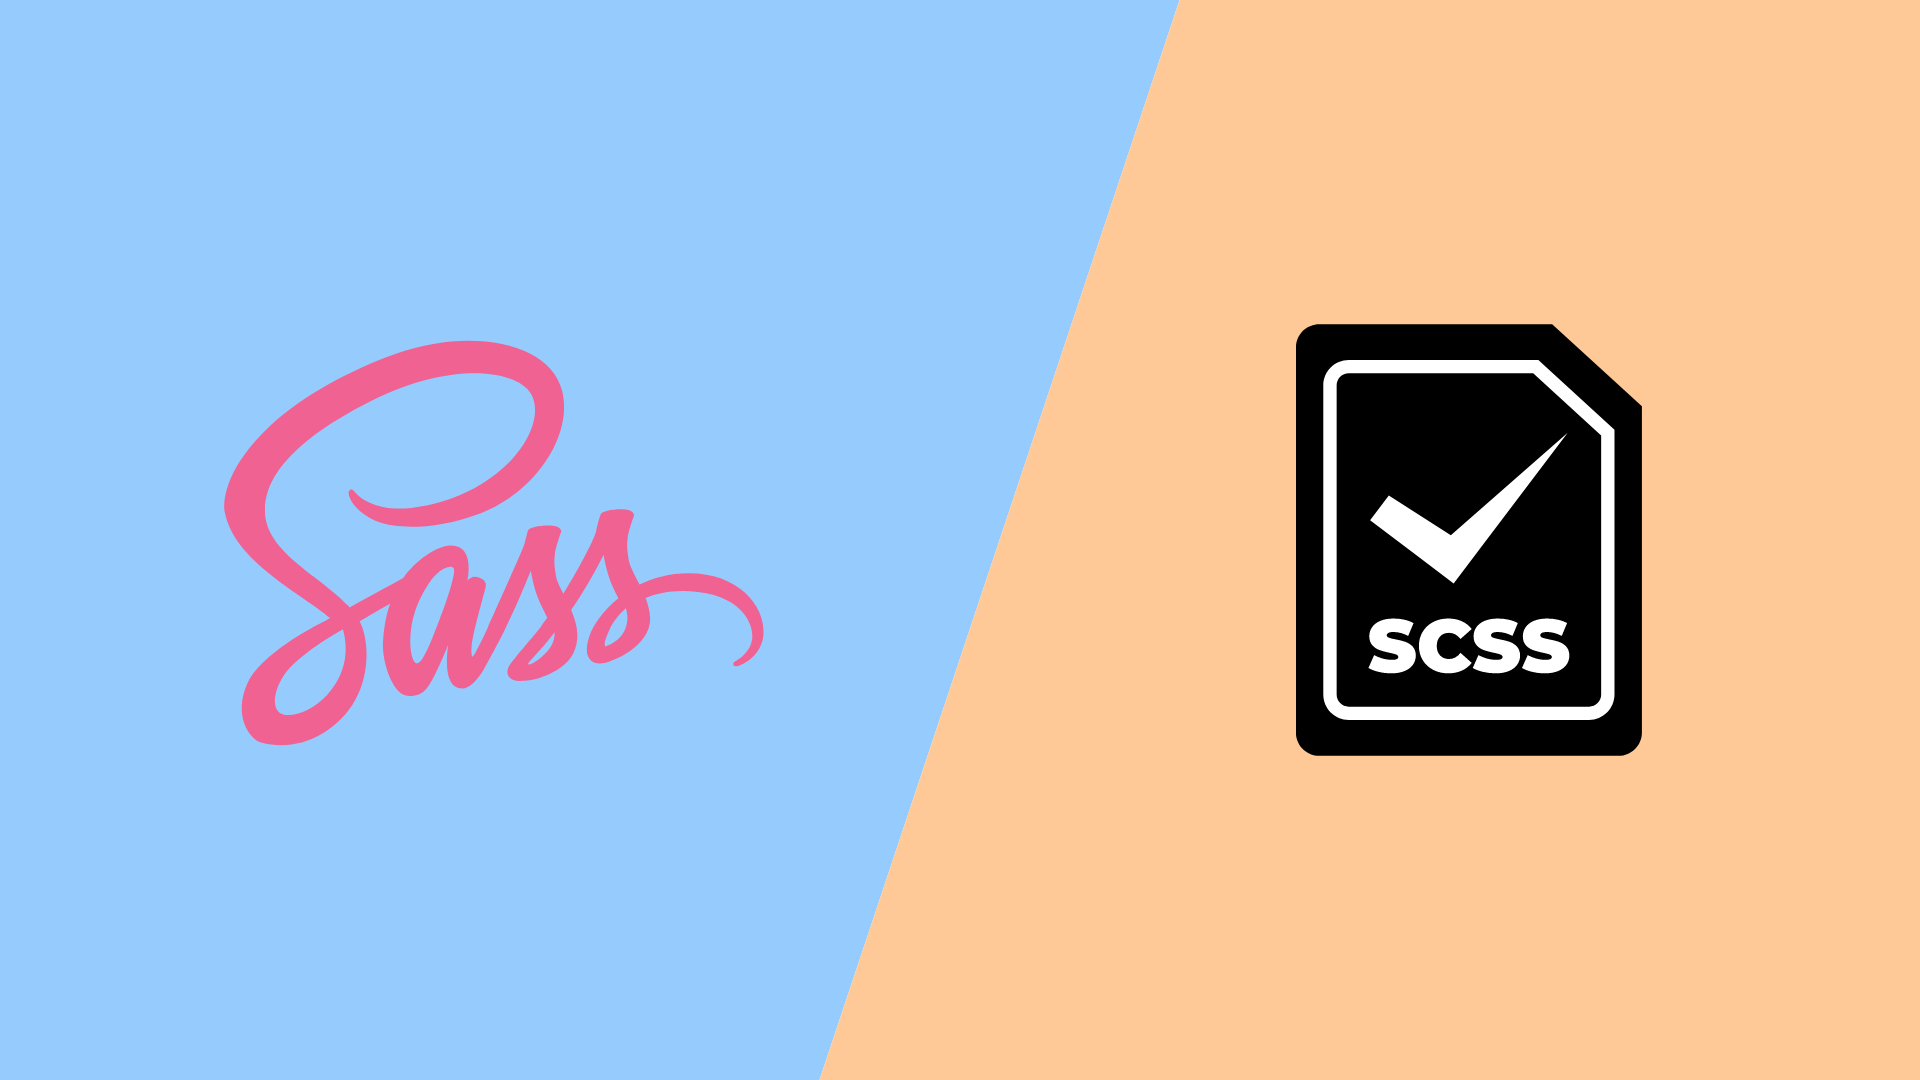 SASS and SCSS: Explanation and Differences